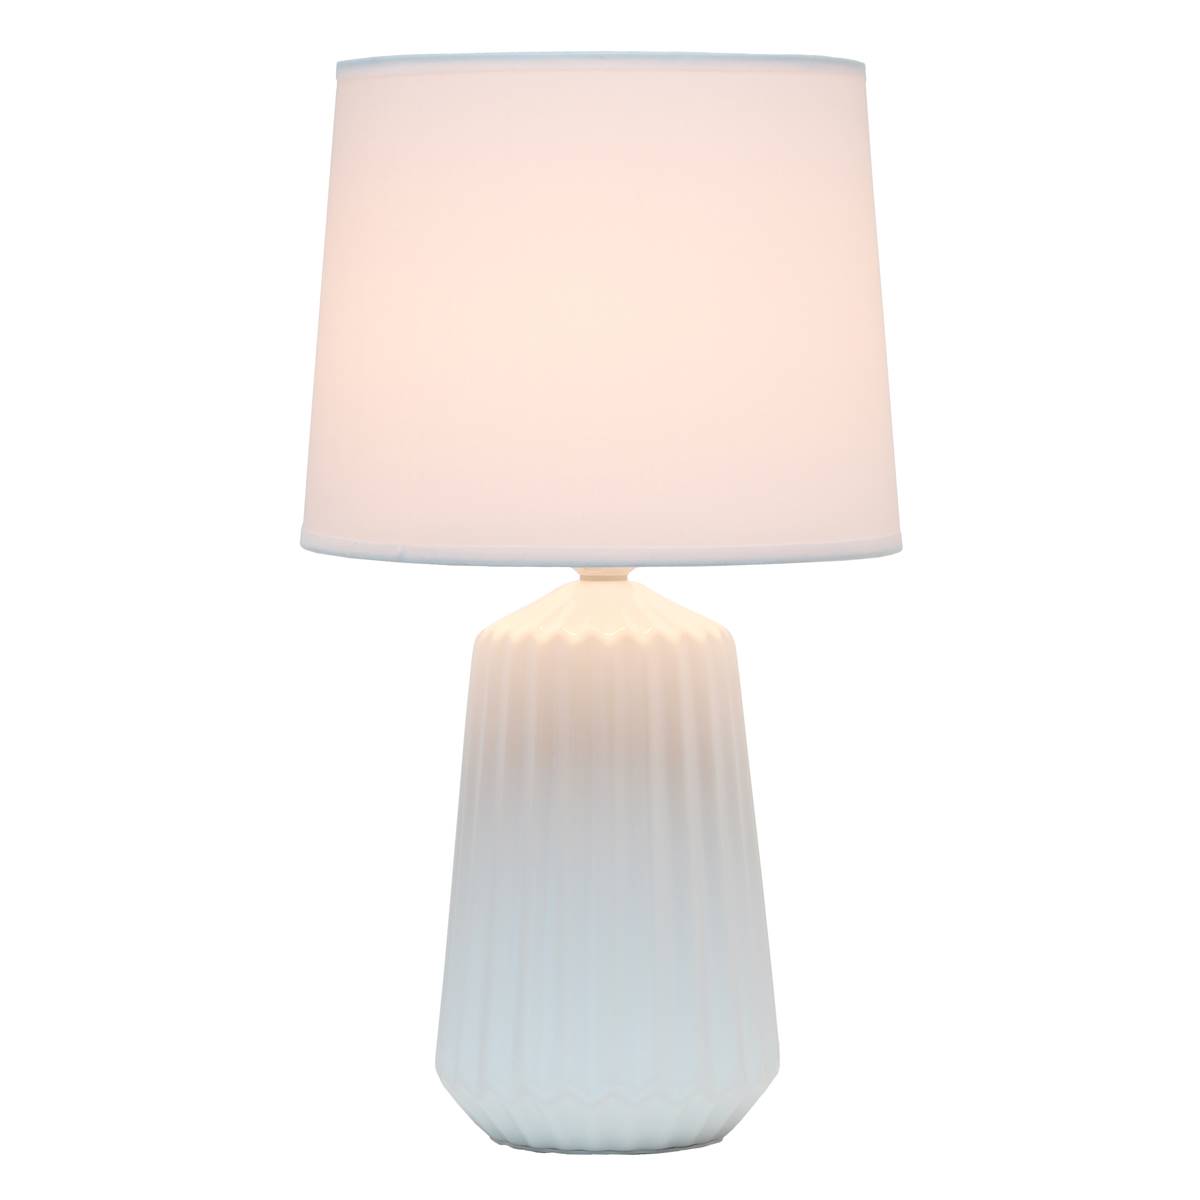 Simple Designs Off White Ceramic Pleated Base Table Lamp W/Shade